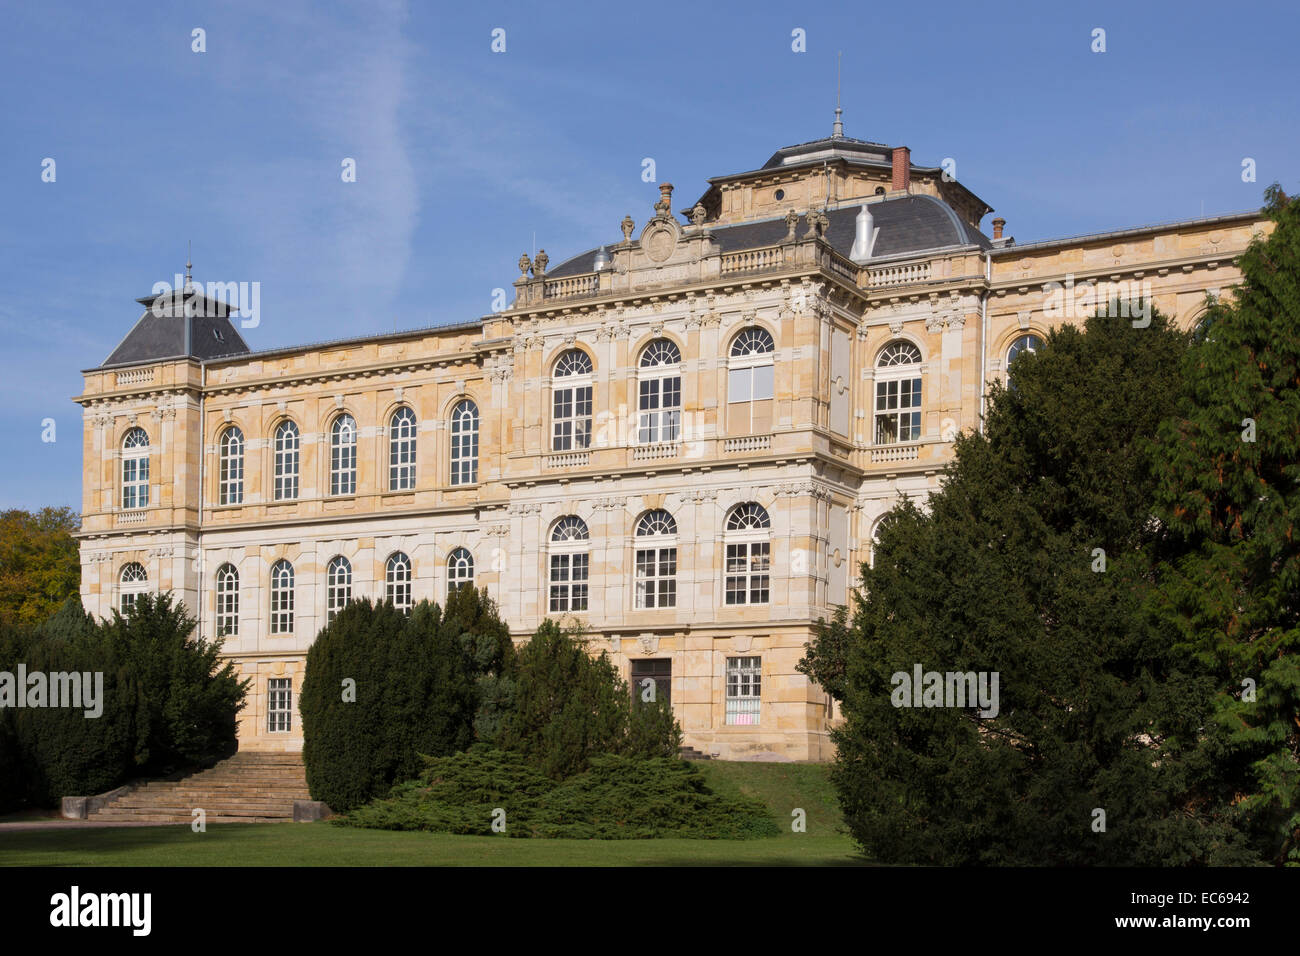 Ducal Museum, Schloss Friedenstein castle, Gotha, Thuringia, Germany, Europe Stock Photo